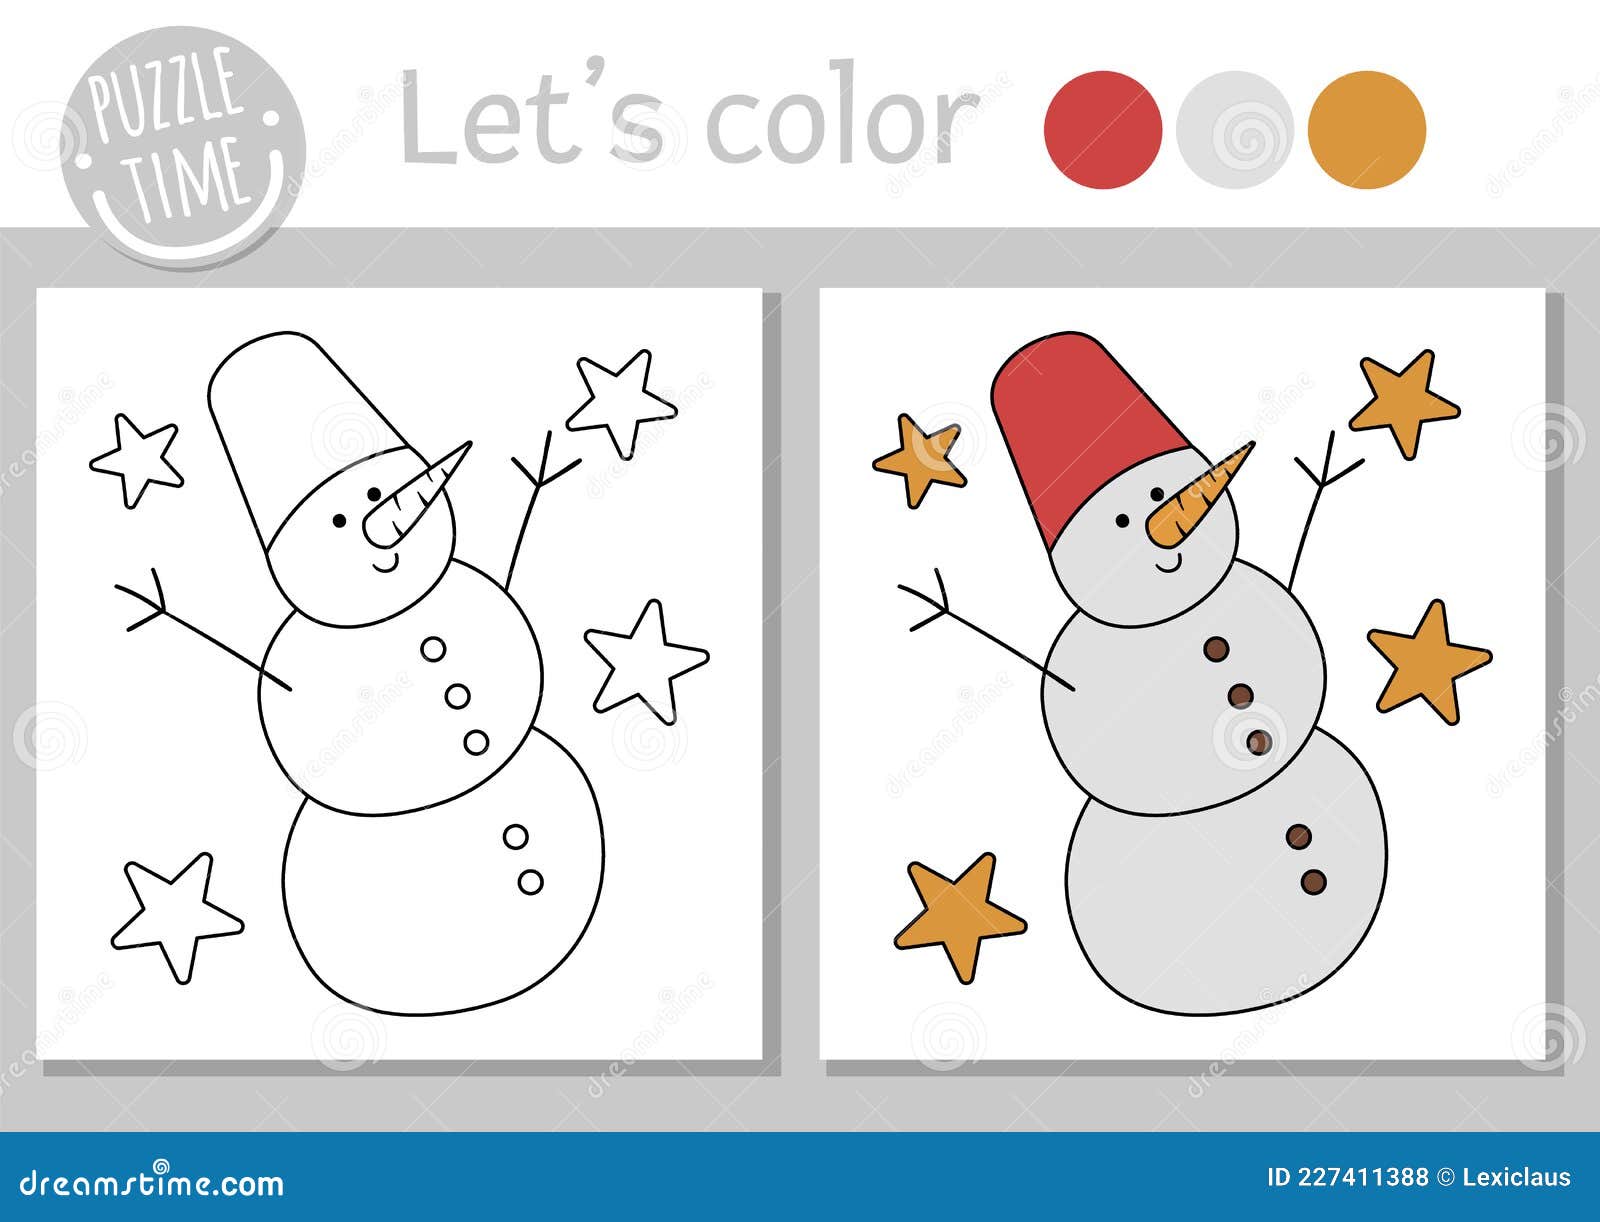 Christmas coloring page for children funny snowman vector winter holiday outline illustration with cute snow man and stars stock vector